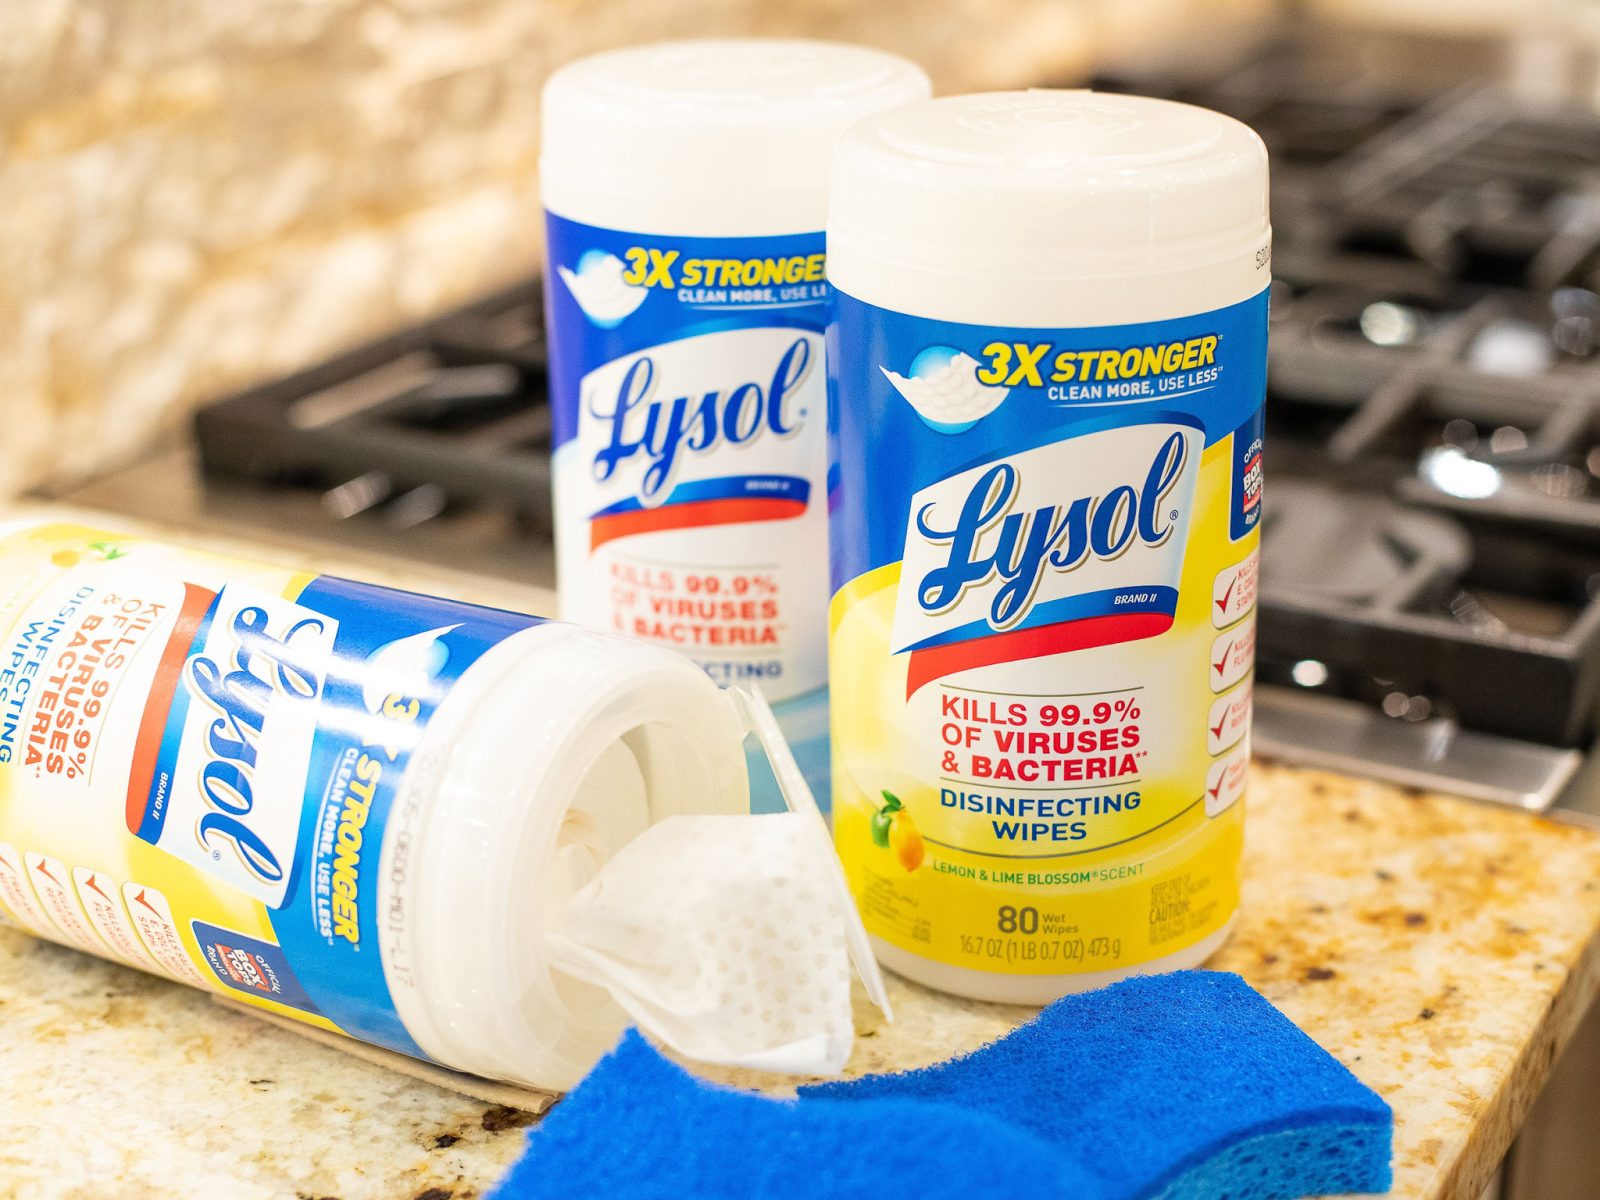 Lysol Disinfecting Wipes As Low As $3.49 At Kroger (Regular Price $6.99)